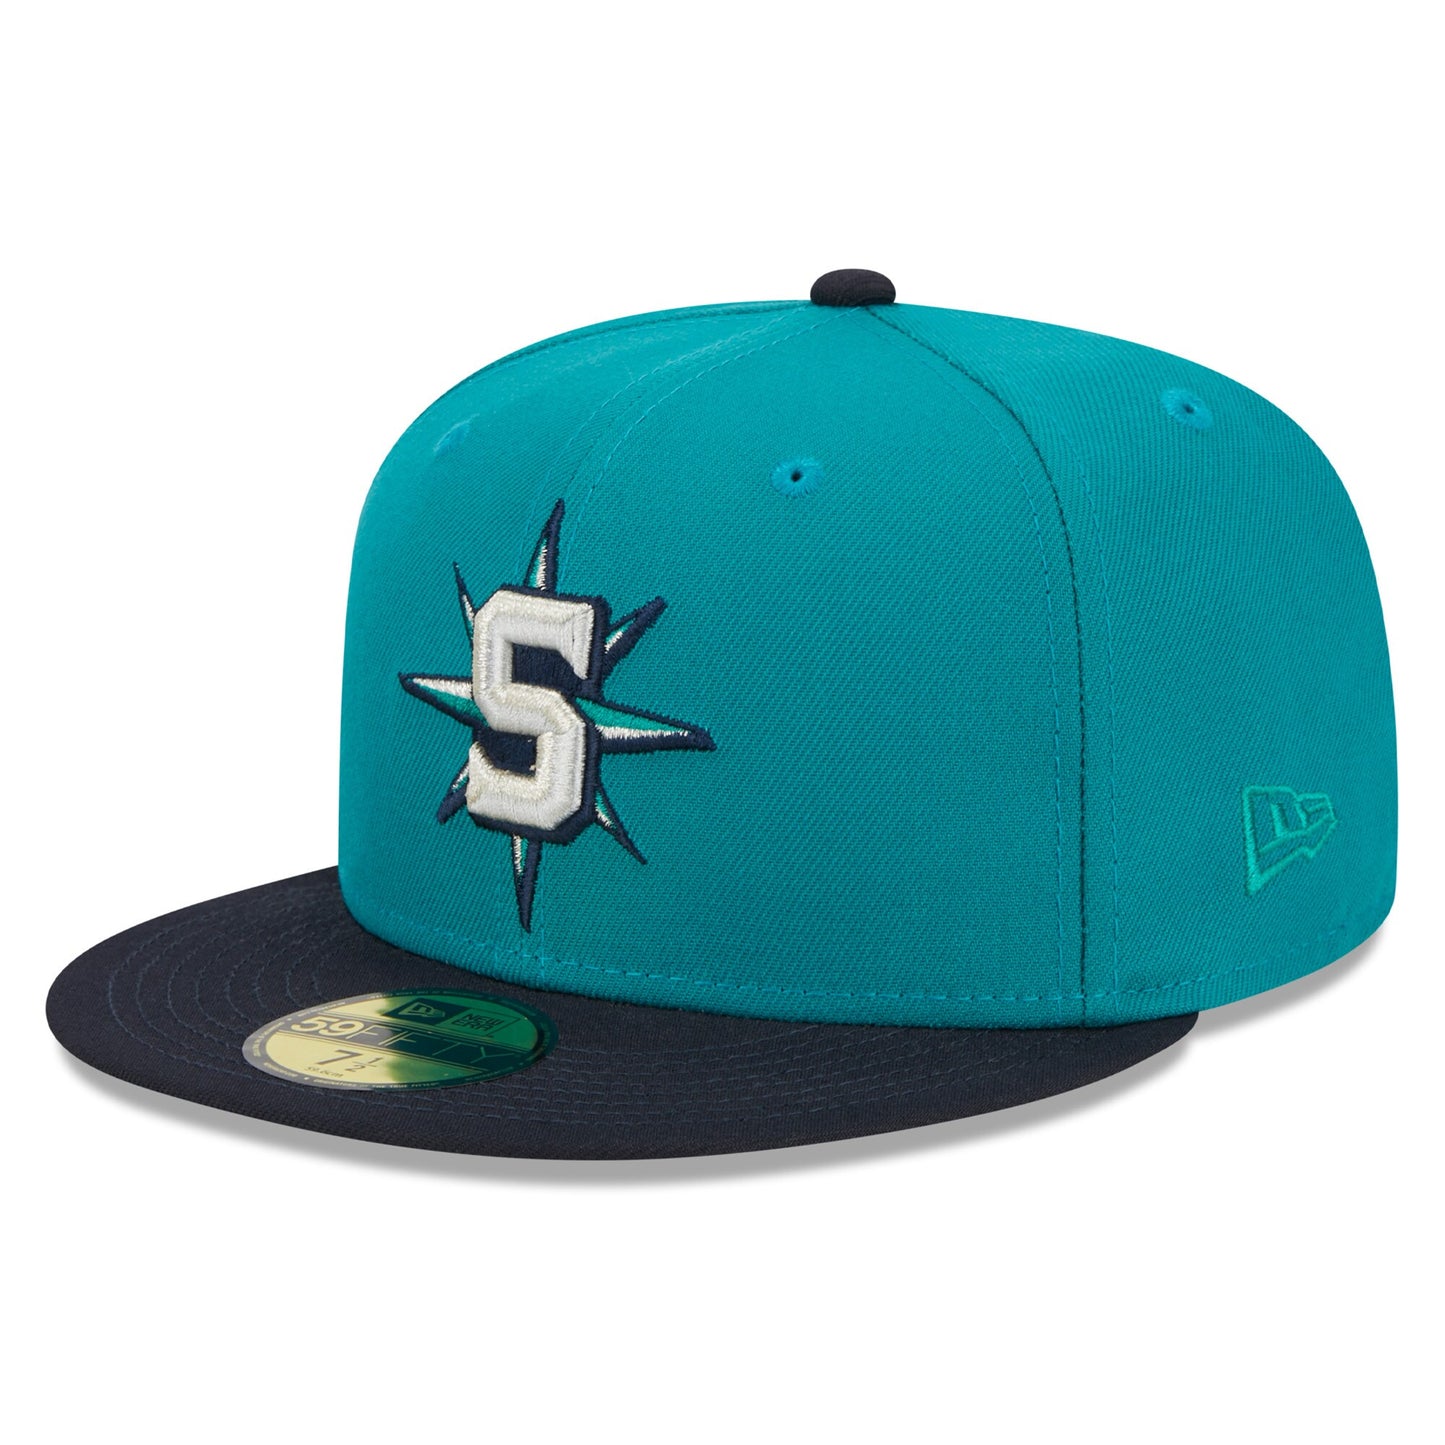 Seattle Mariners New Era Cooperstown Collection Retro City 59FIFTY Fitted Hat - Aqua